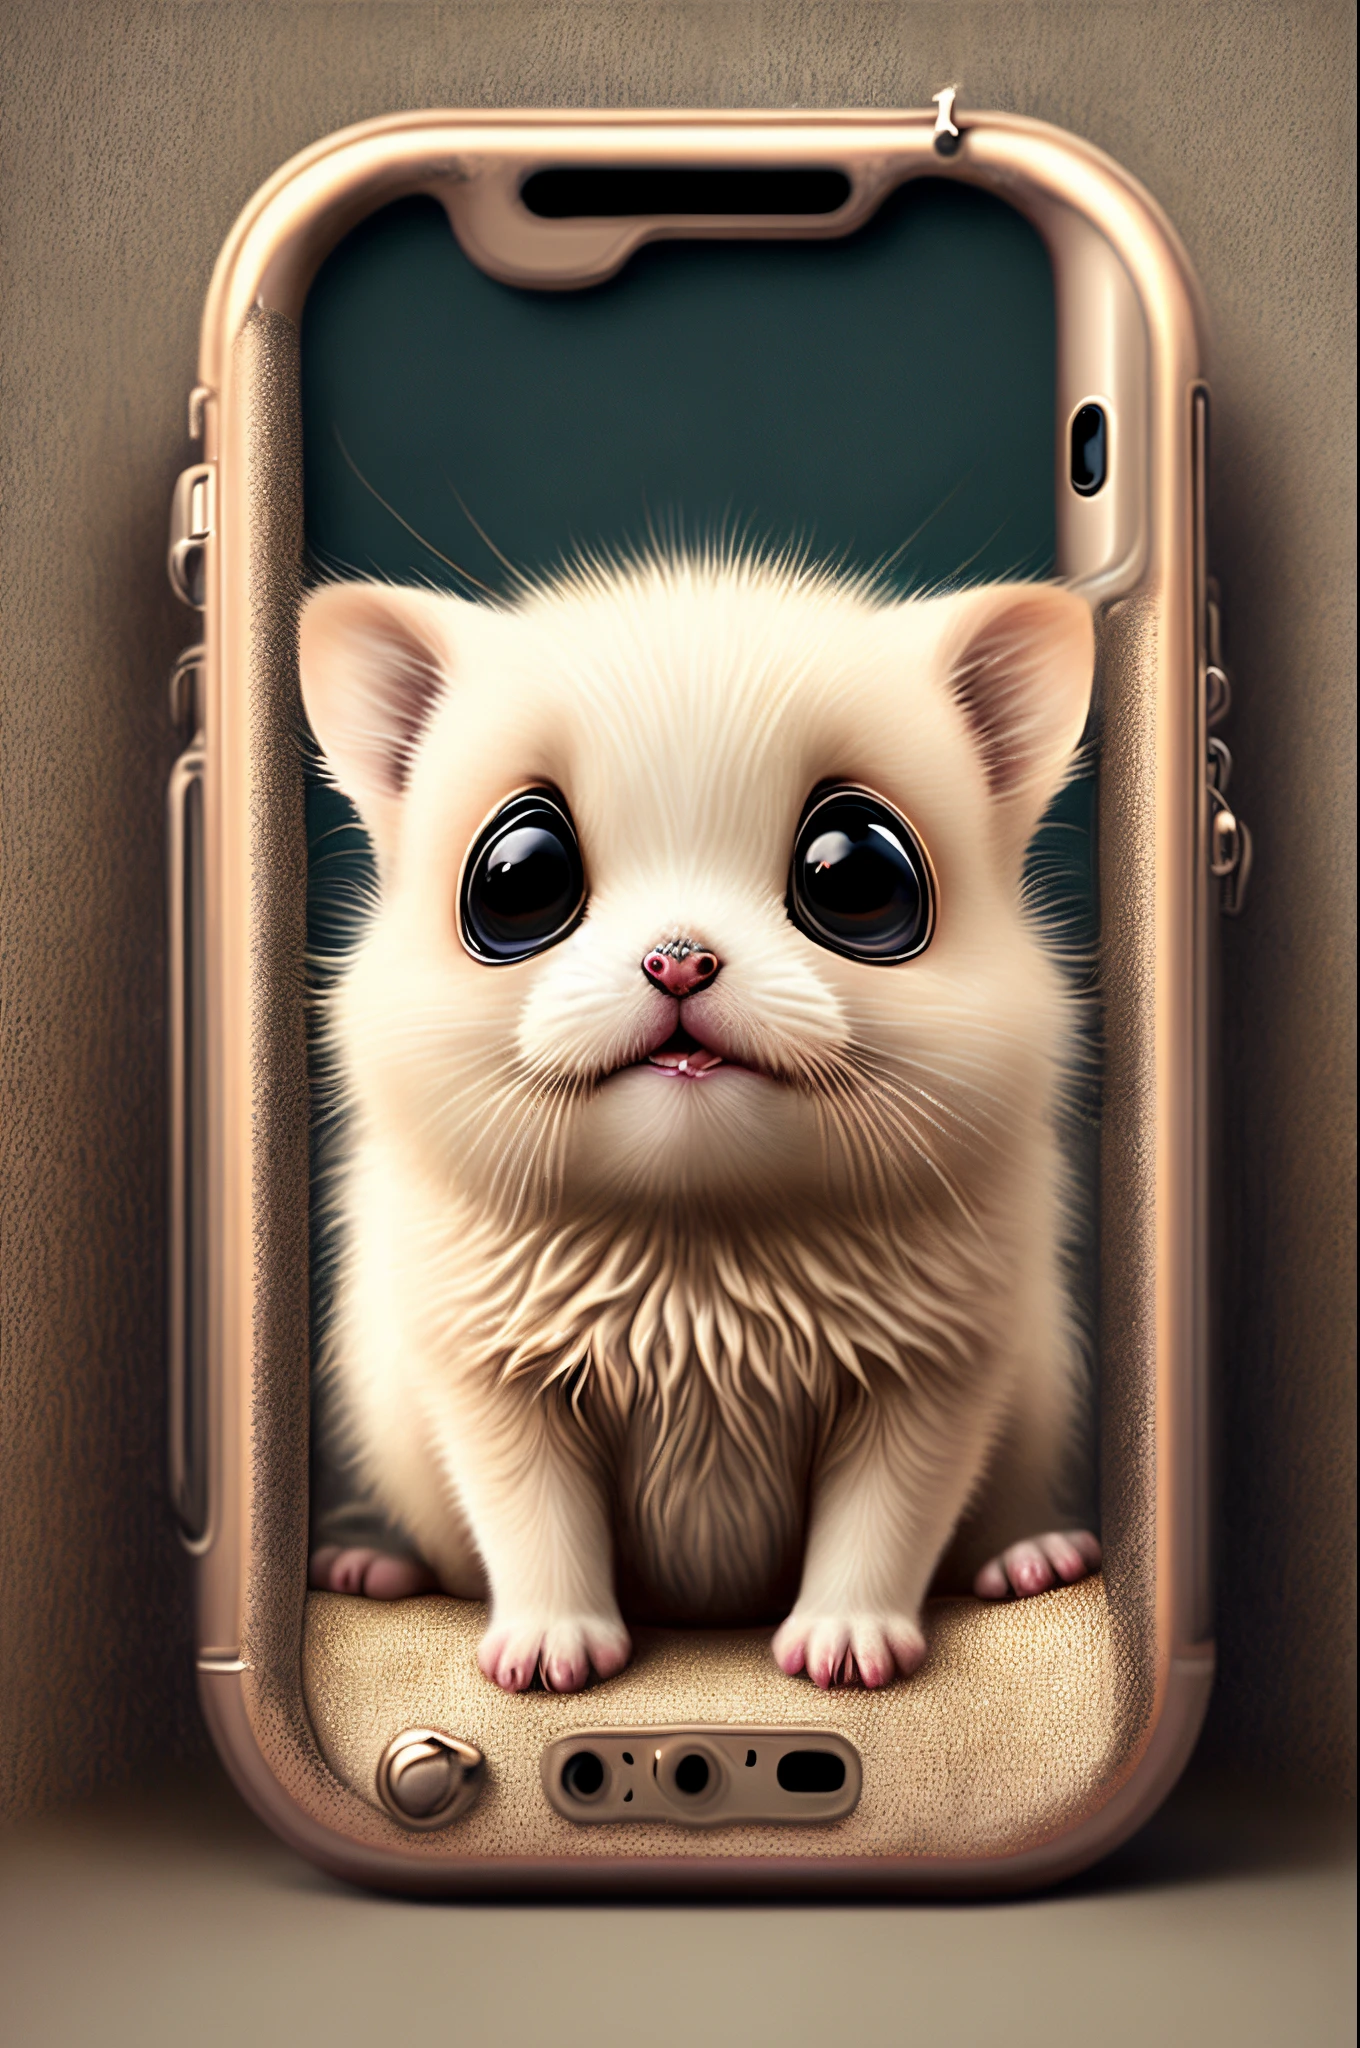 very cute creature who’s in its home which is an iphone wallpaper